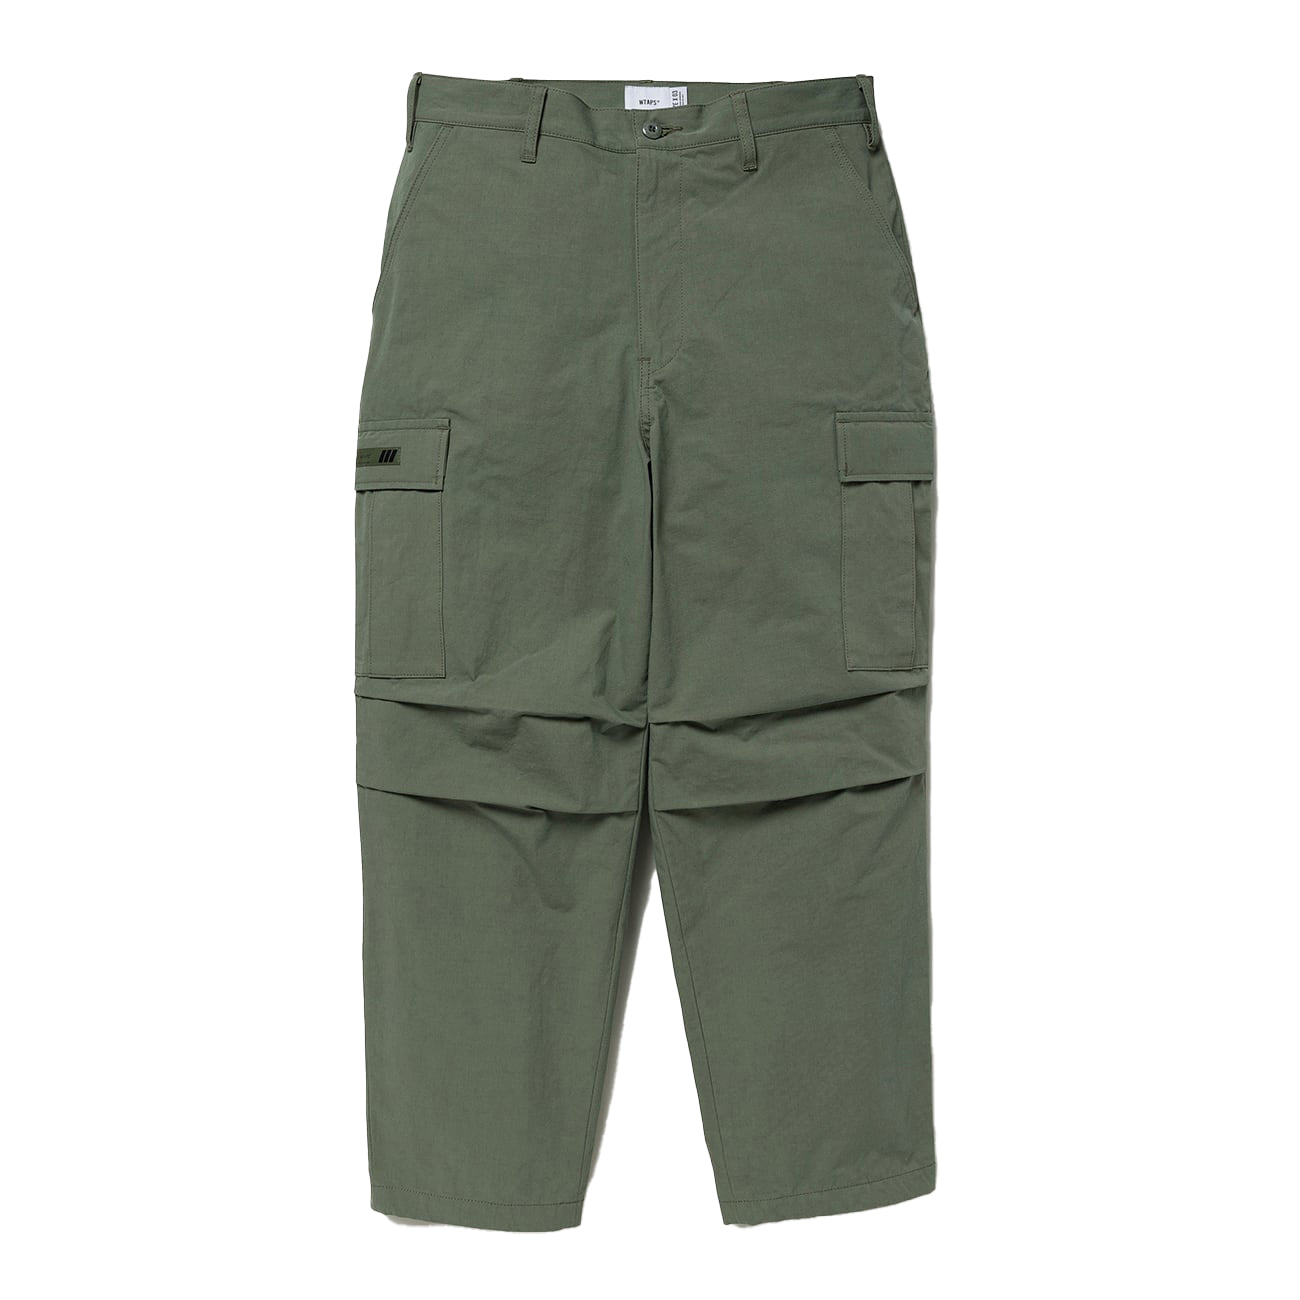 MILT9601 / Trousers / Nyco. Ripstop – INVINCIBLE Indonesia